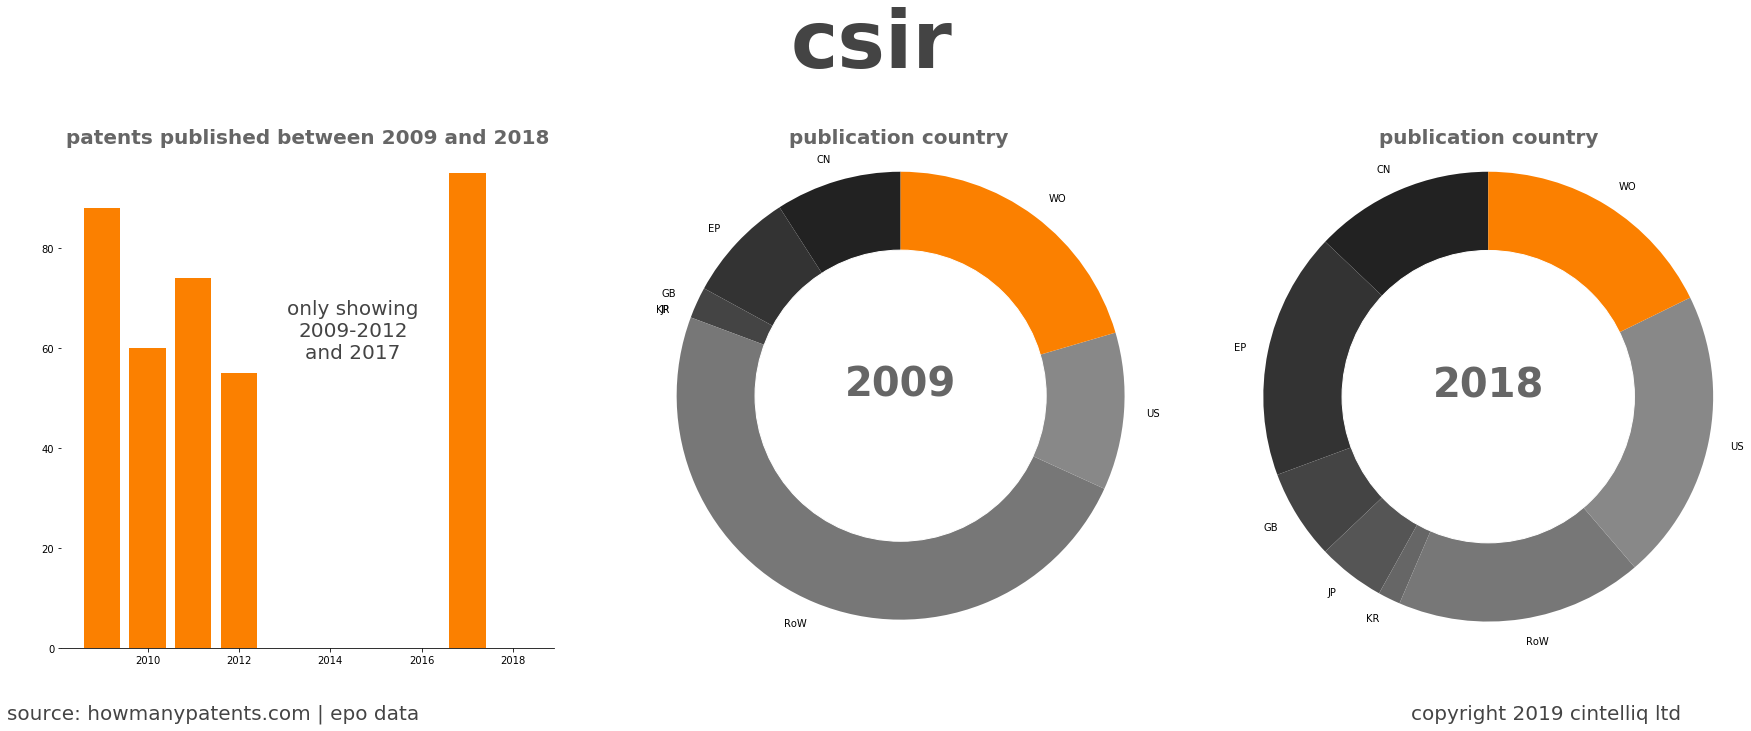 summary of patents for Csir